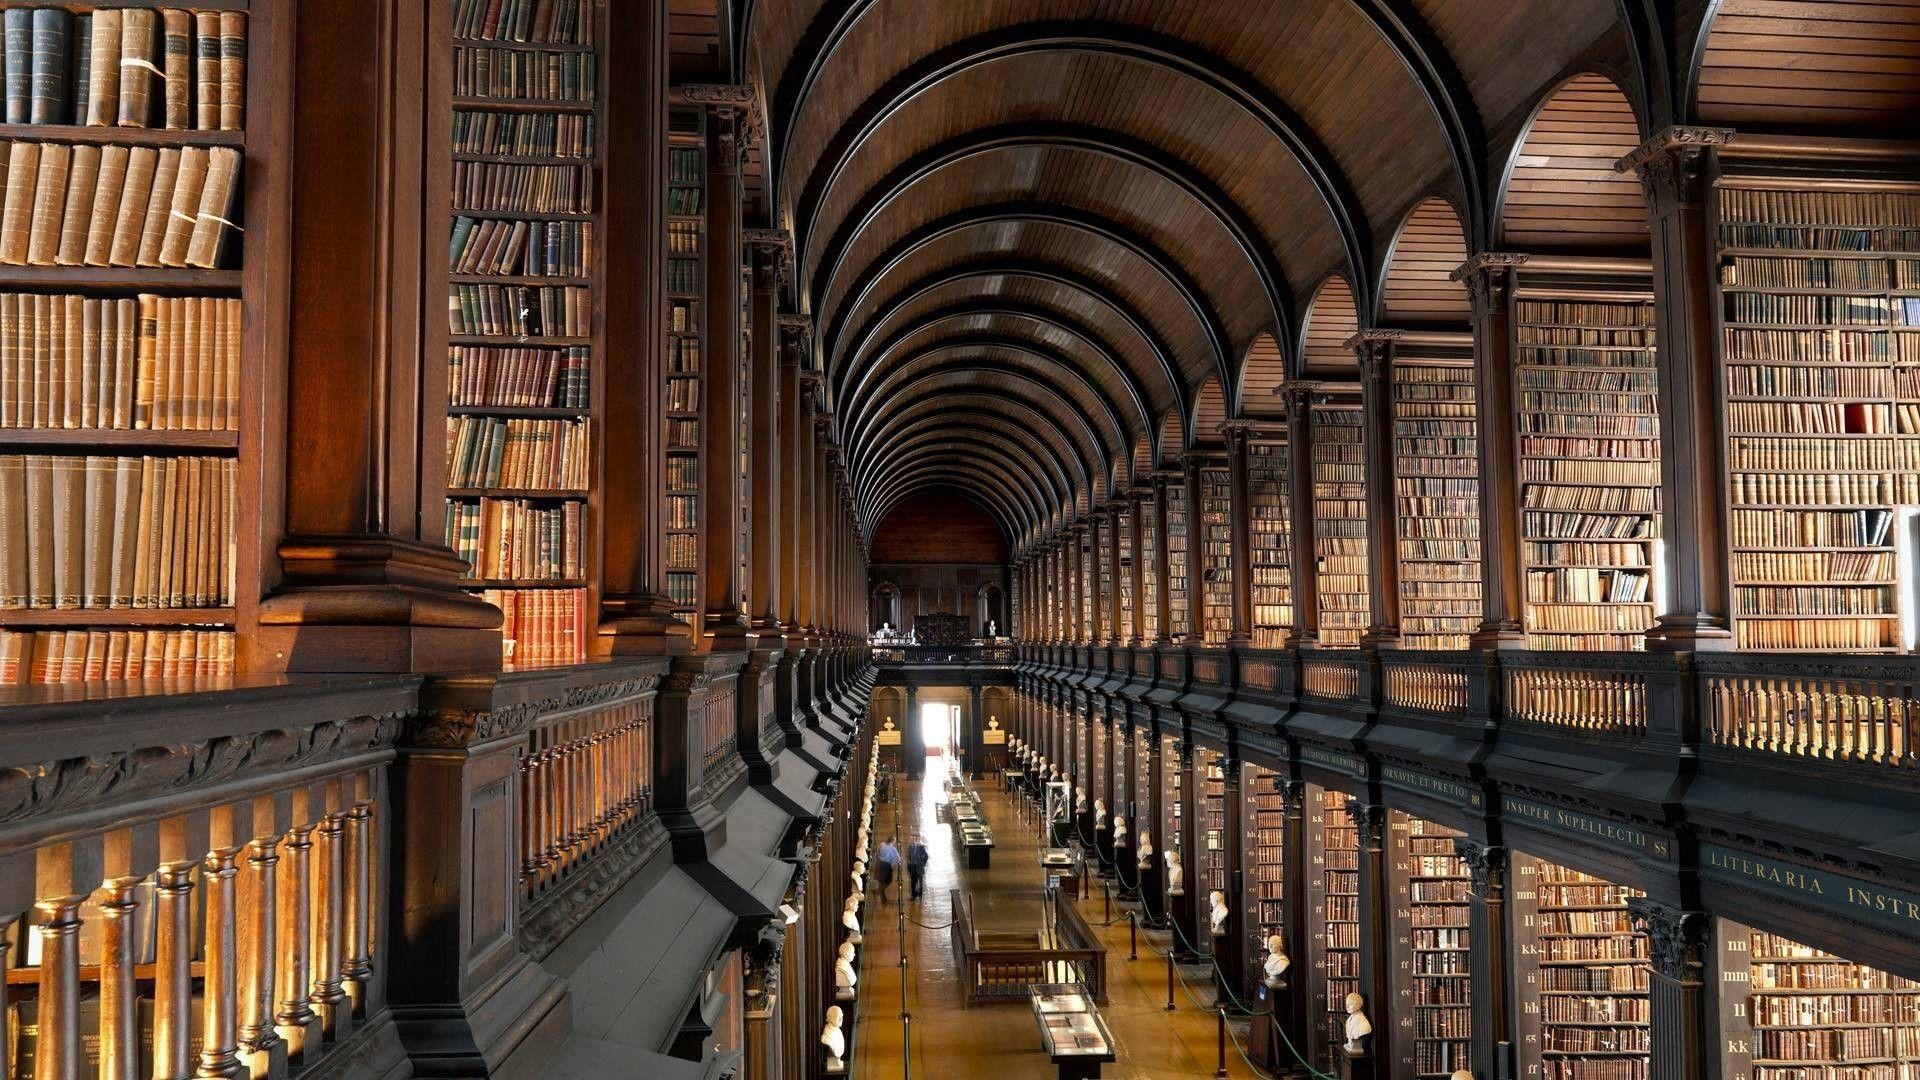 Dublin: Trinity College Library, The largest library in Ireland, Established in 1592. 1920x1080 Full HD Wallpaper.